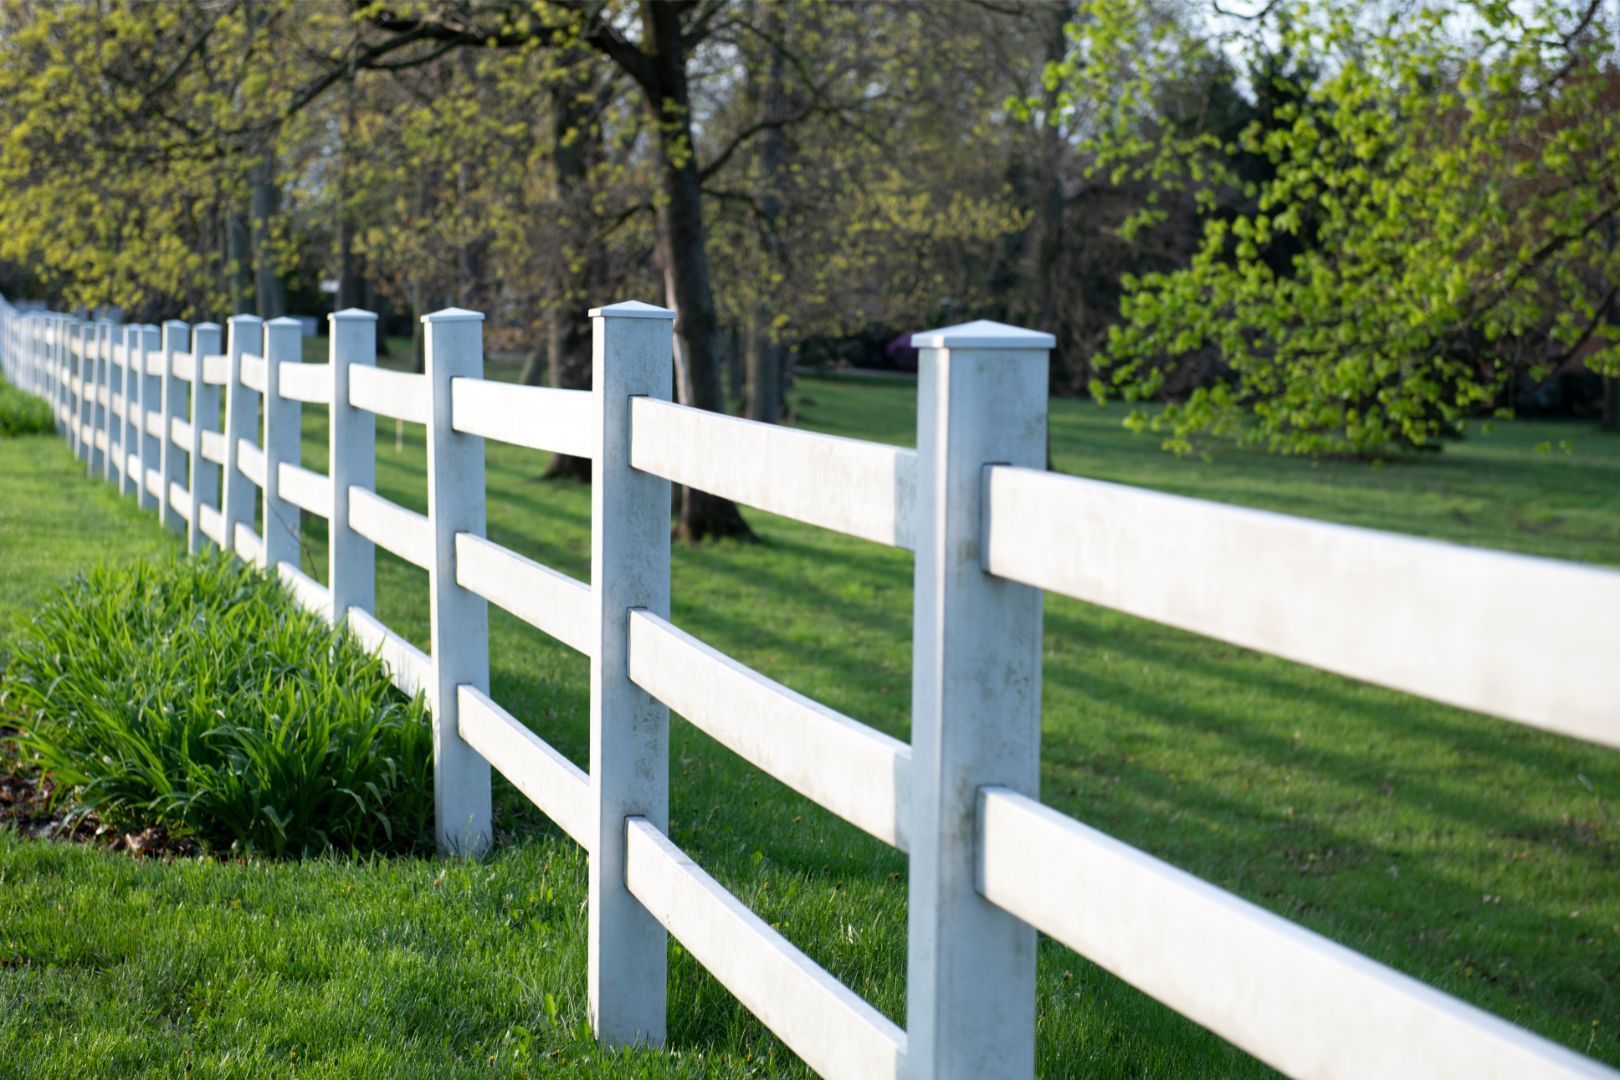 Image of a white split rail fence in a grassy lawn in Decatur, GA